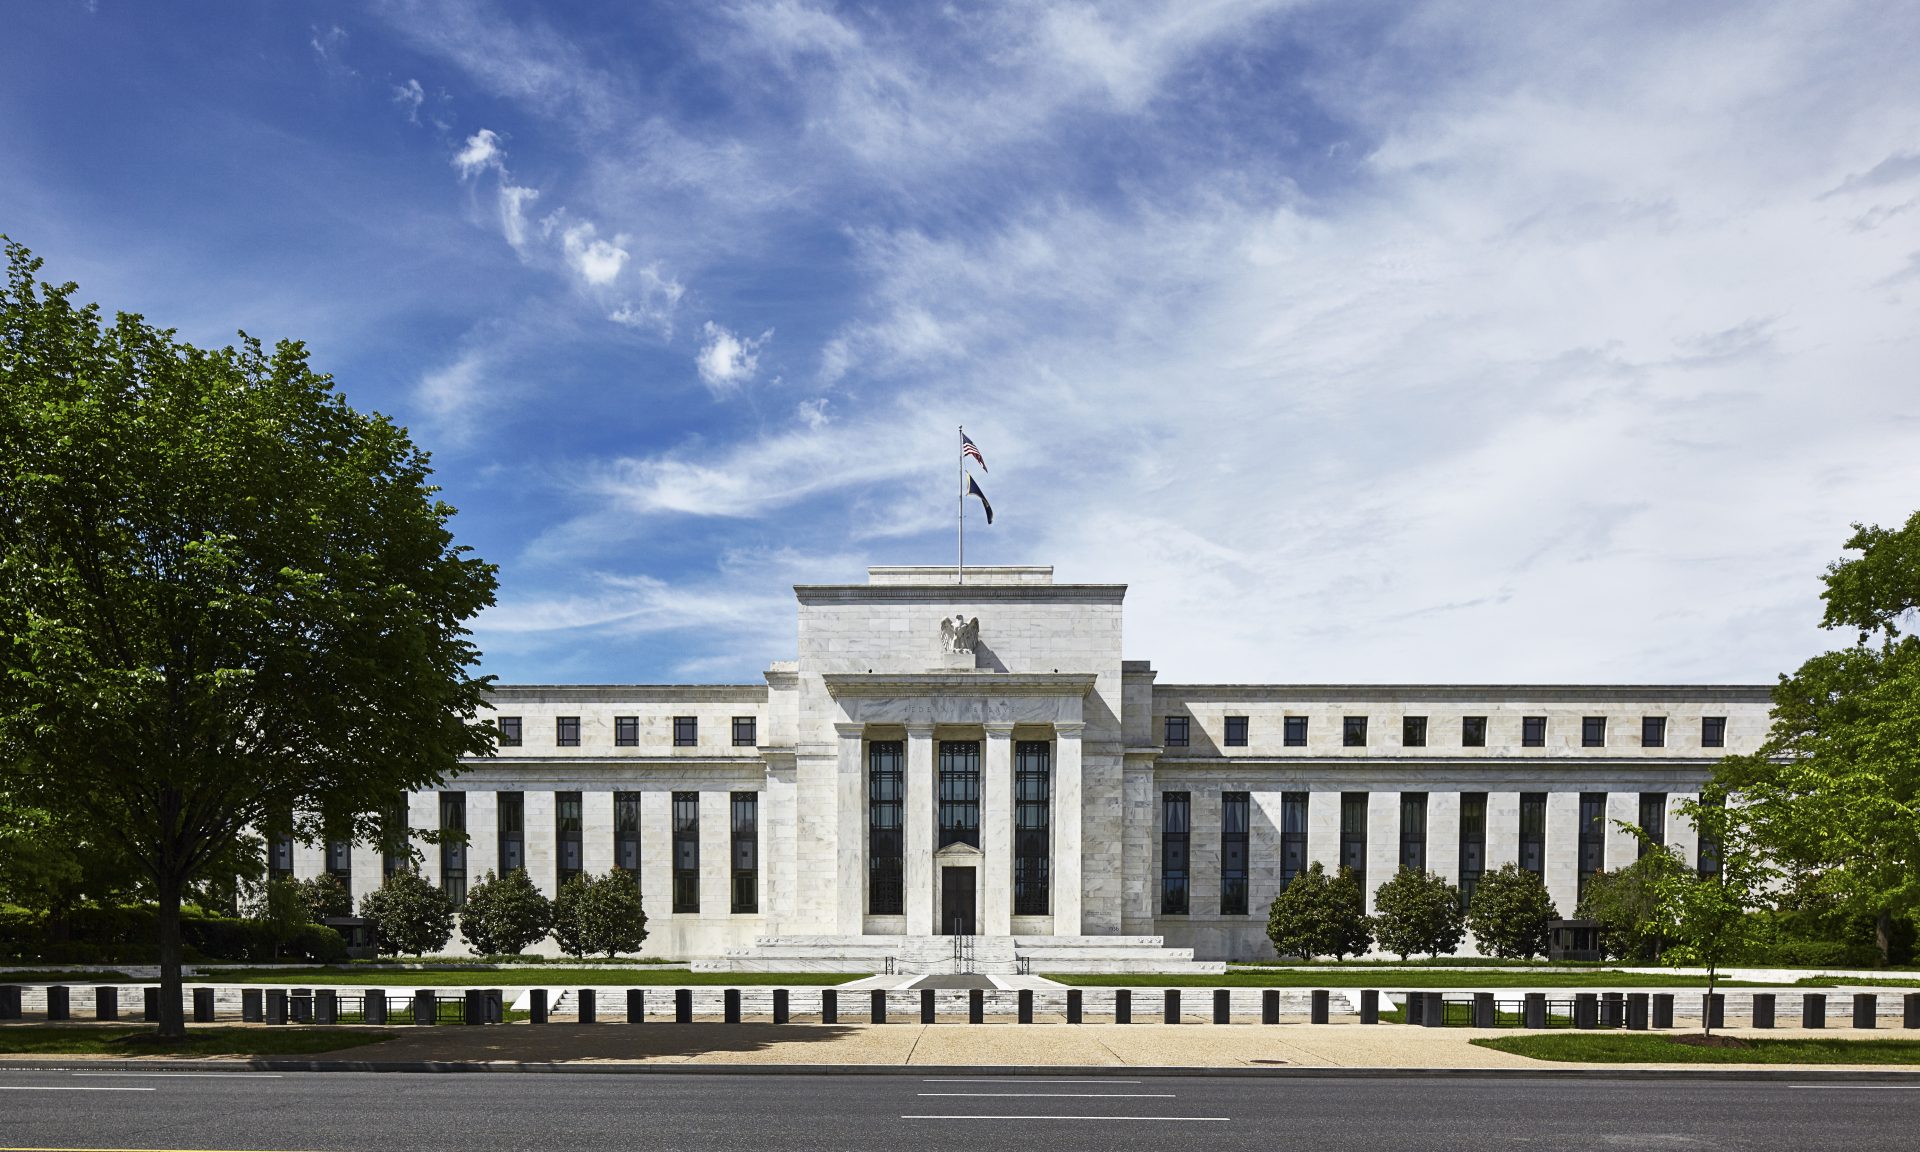 The Impact of Federal Reserve’s $300B Balance Sheet Expansion on Crypto: Opportunities and Risks